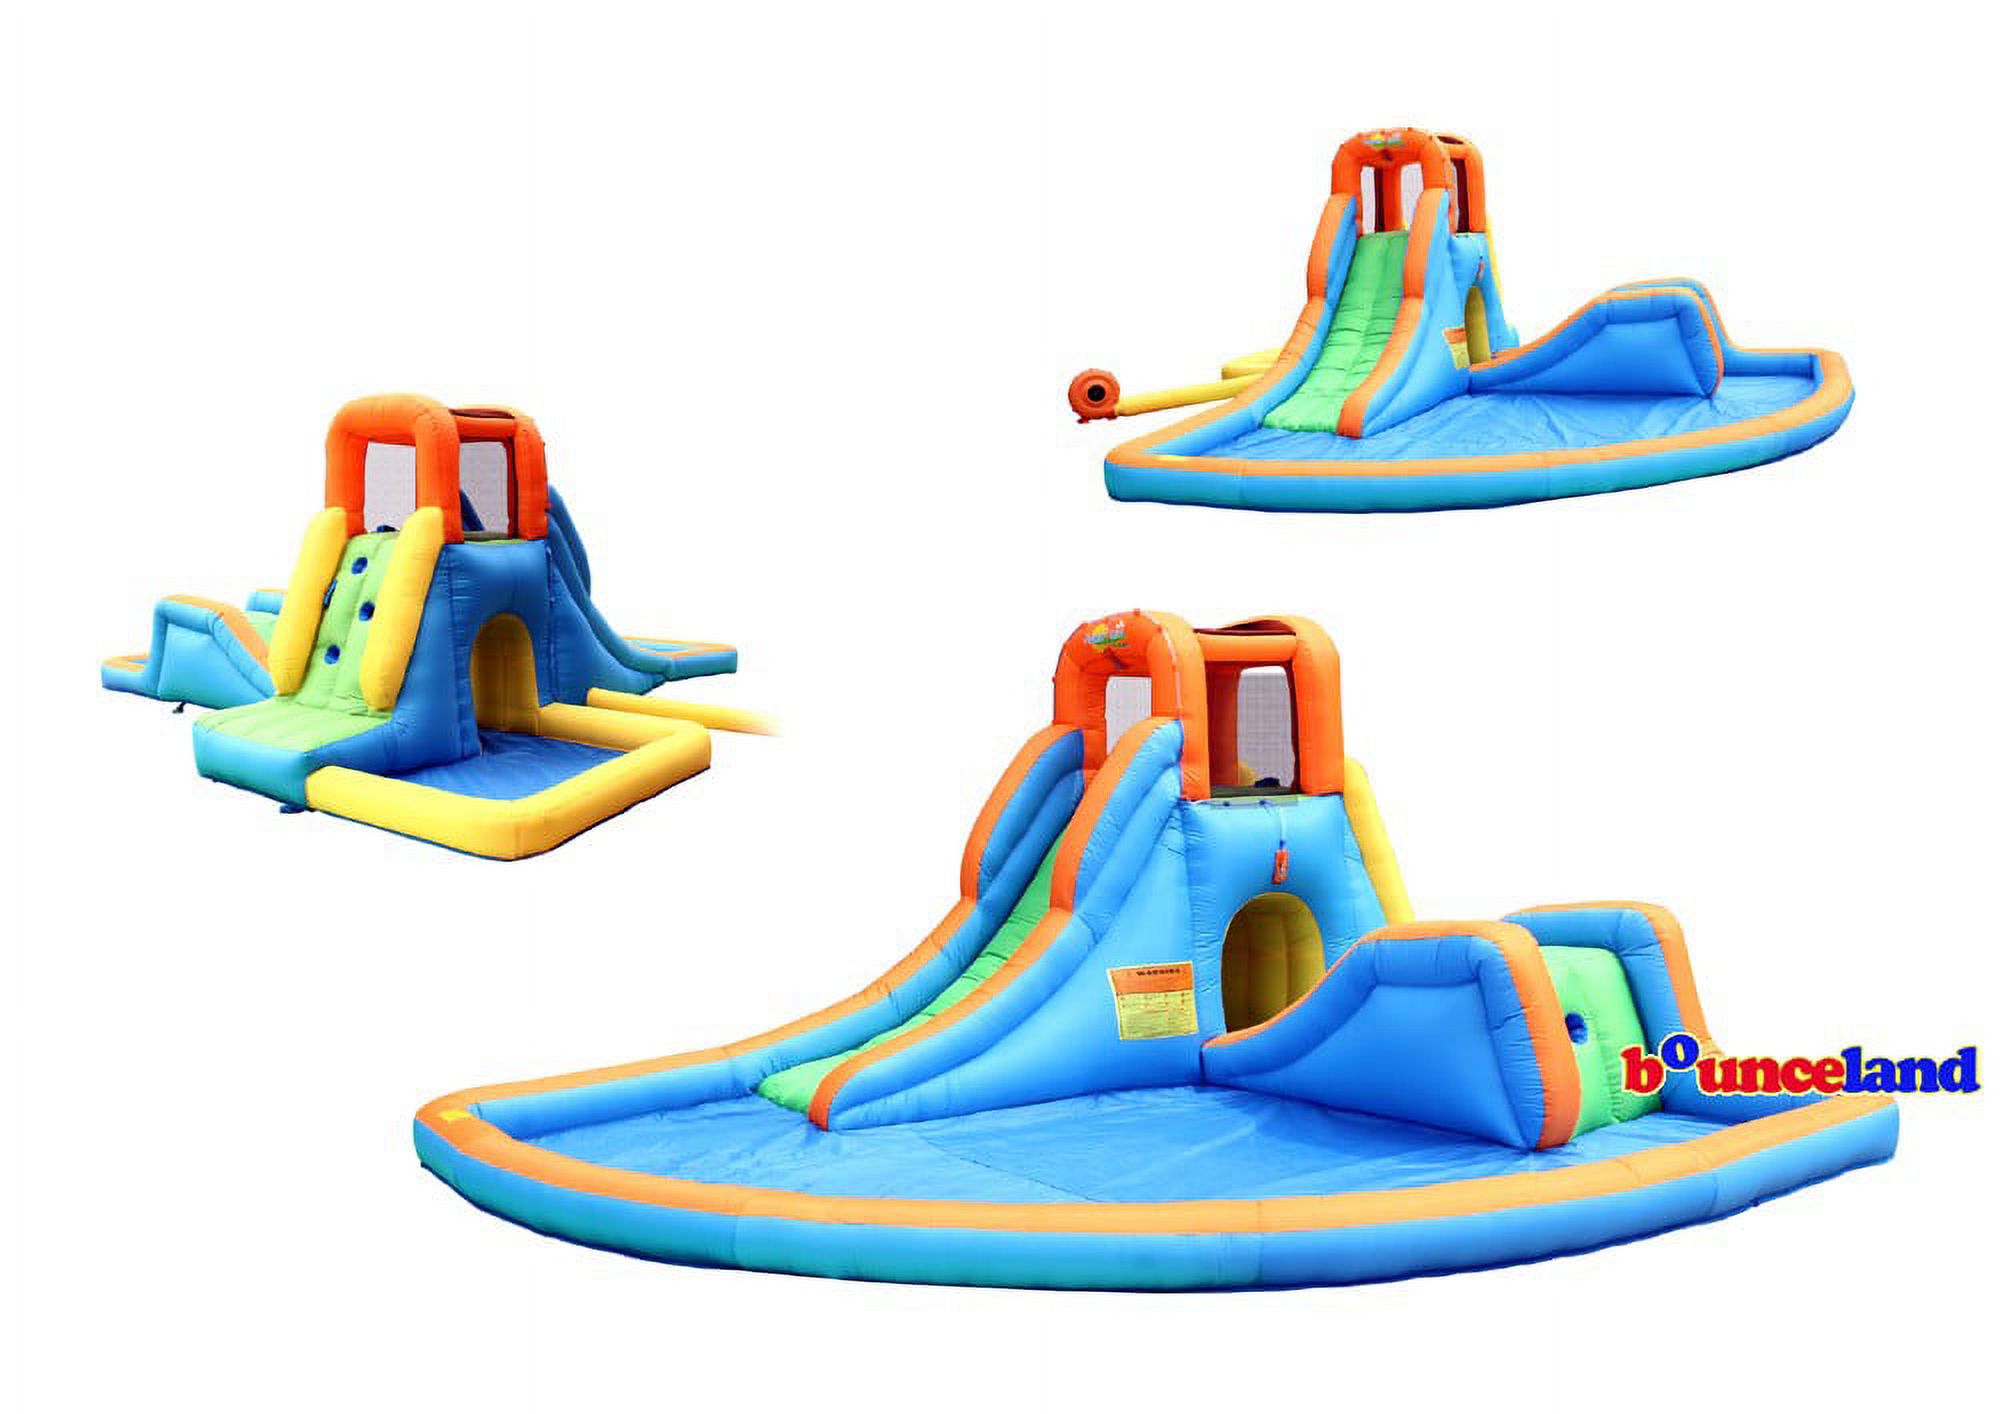 Bounceland Cascade Water Slides with large pool - image 2 of 3